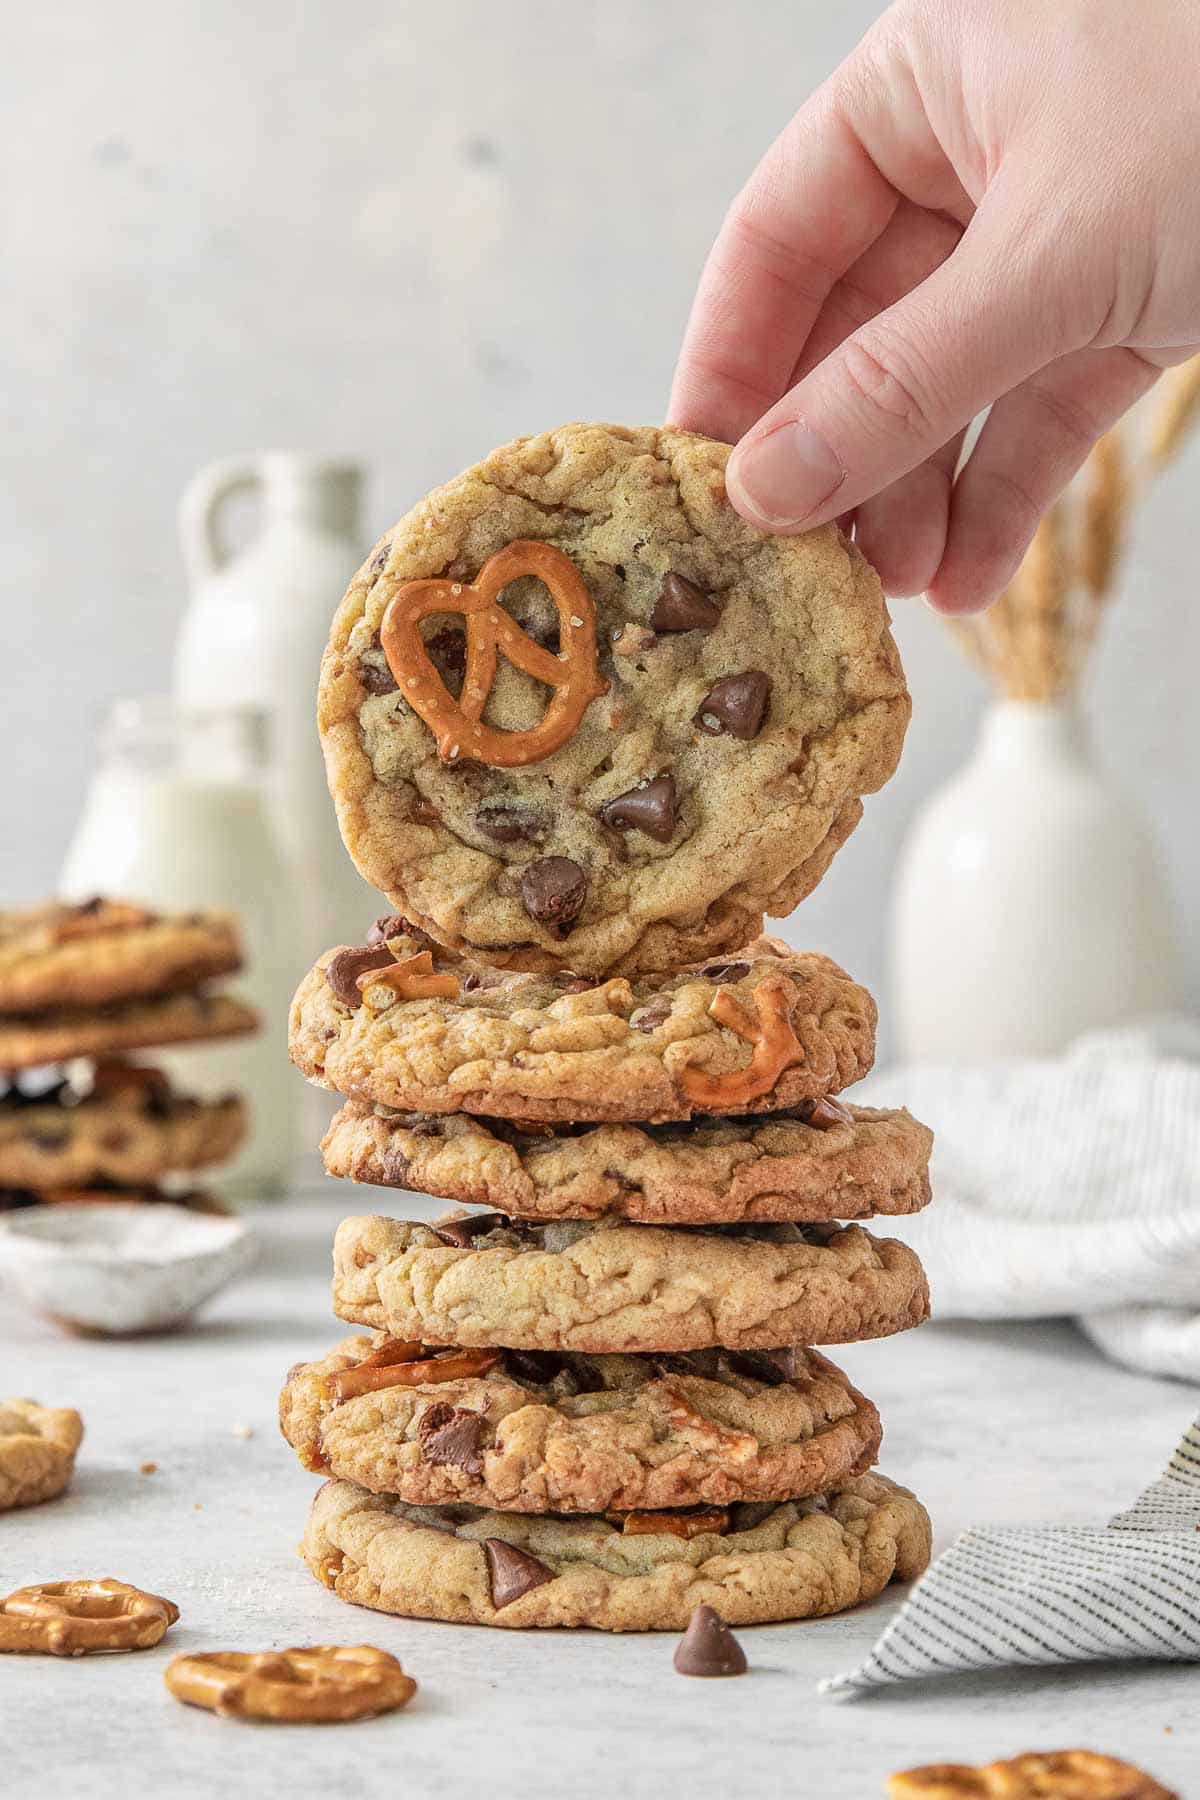 A hand is grabbing a cookie from a stack of Kitchen Sink Cookies.